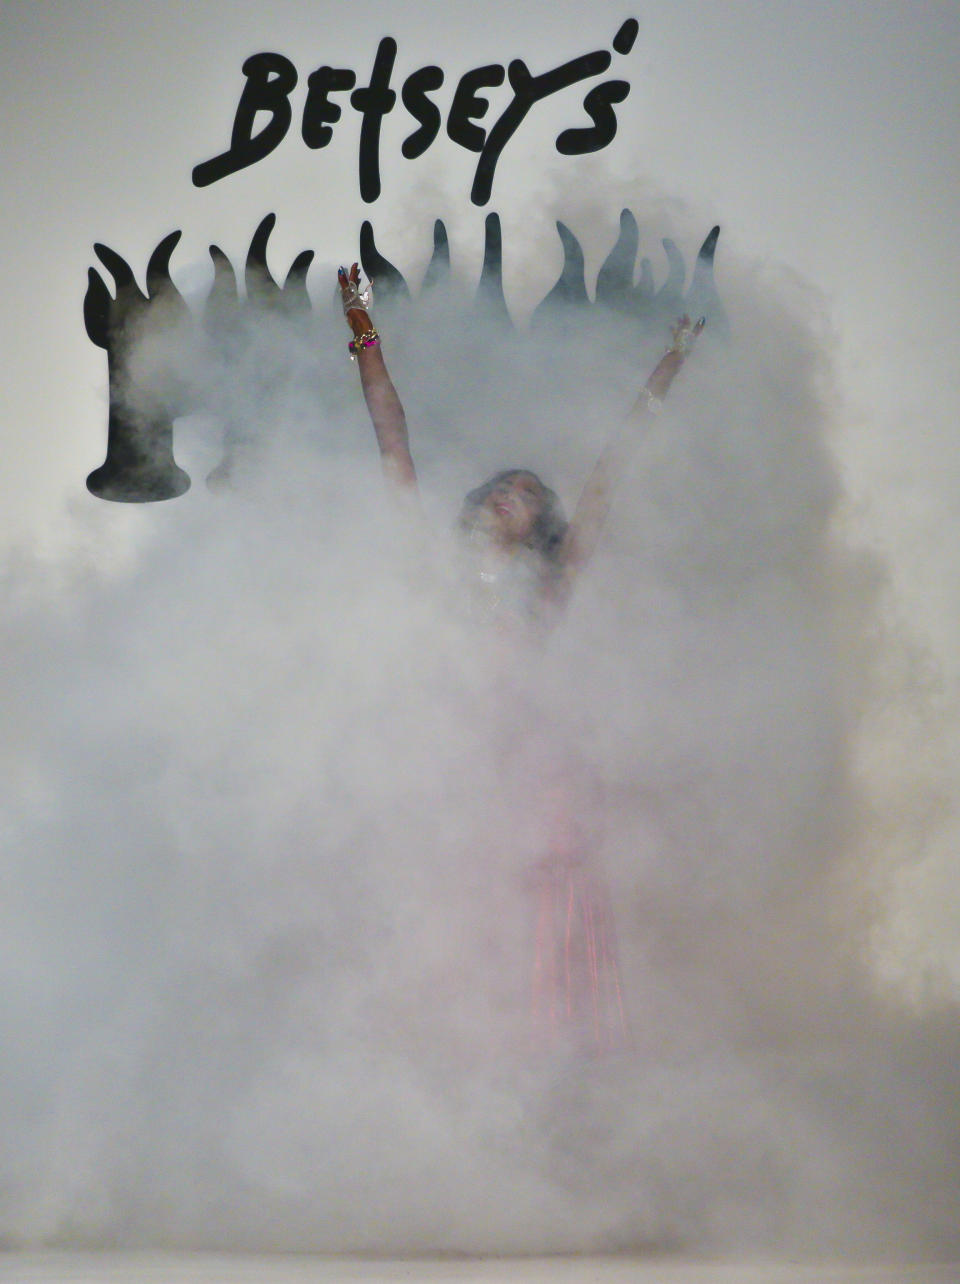 A model stands in a plume of smoke as fashion from the Betsey Johnson Fall 2014 collection is modeled during New York Fashion Week on Wednesday Feb. 12, 2014. (AP Photo/Bebeto Matthews)